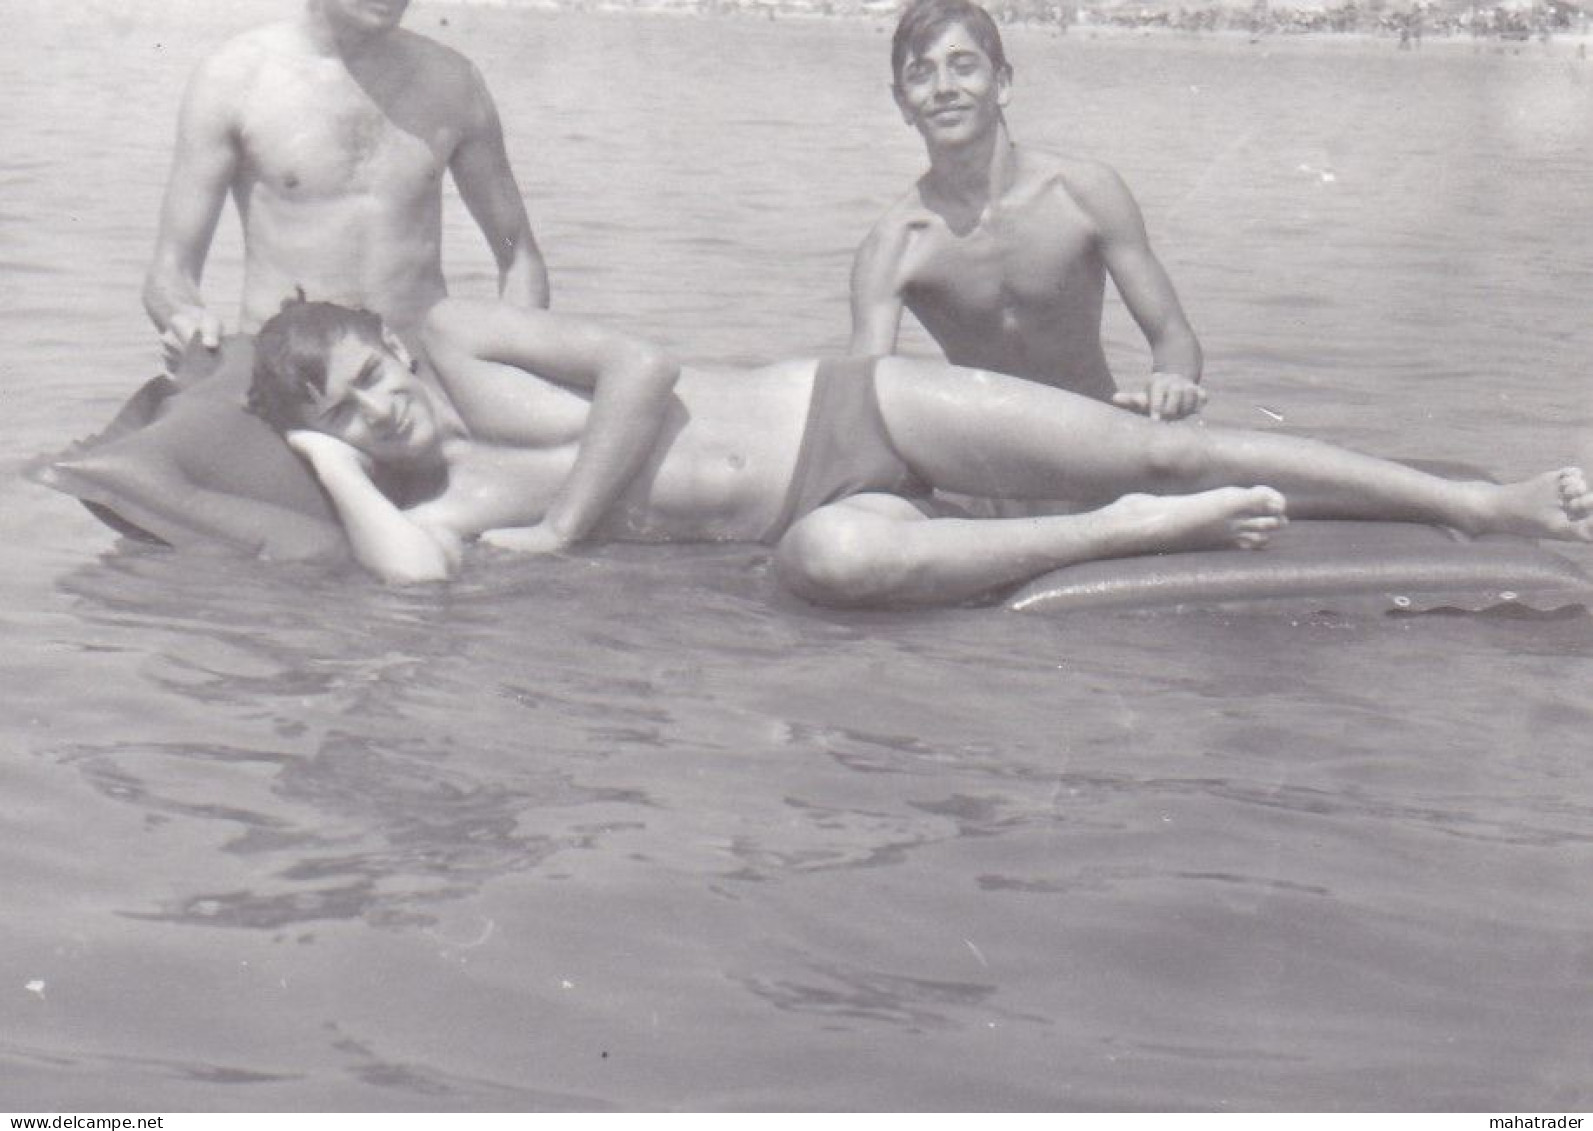 Old Real Original Photo - Naked Young Men Having Fun In The Sea - Ca. 8.5x6 Cm - Personnes Anonymes